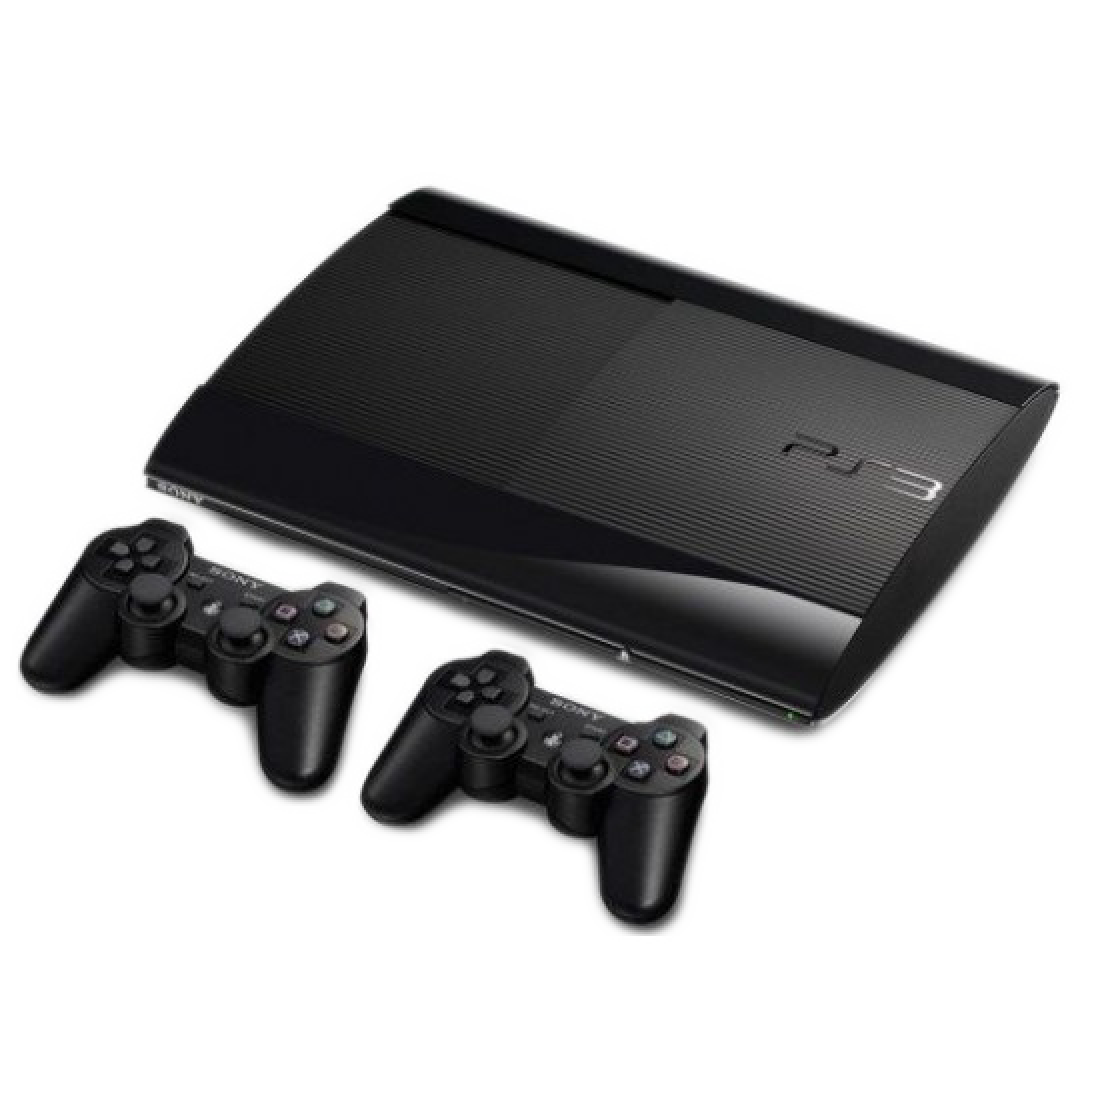 Ps3 12. Sony ps3 super Slim. Sony PLAYSTATION 3 super Slim. Ps3 super Slim 500gb. Sony PLAYSTATION 3 ps3 super Slim.